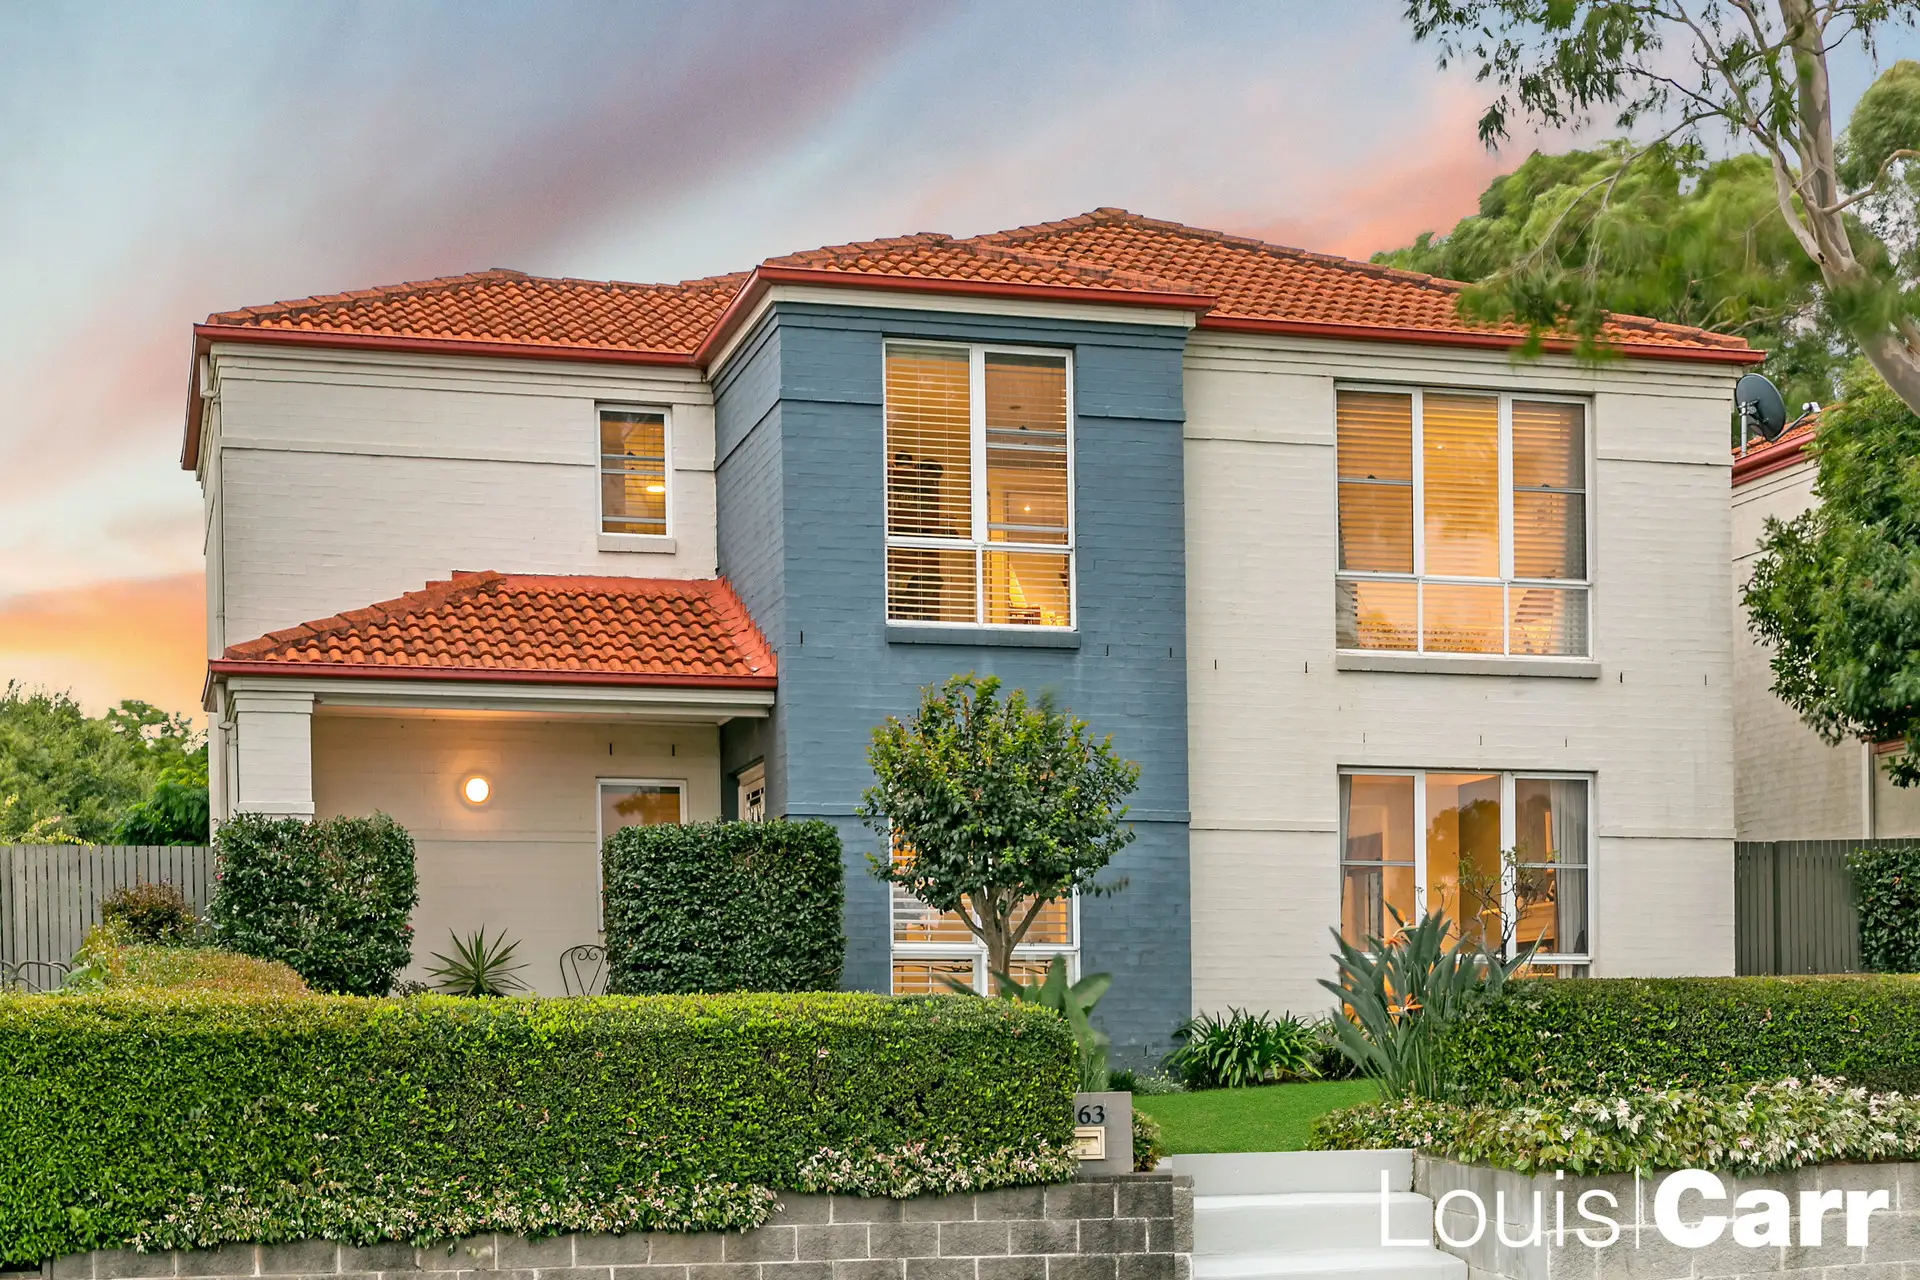 Photo #1: 163 Conrad Road, Kellyville Ridge - Sold by Louis Carr Real Estate